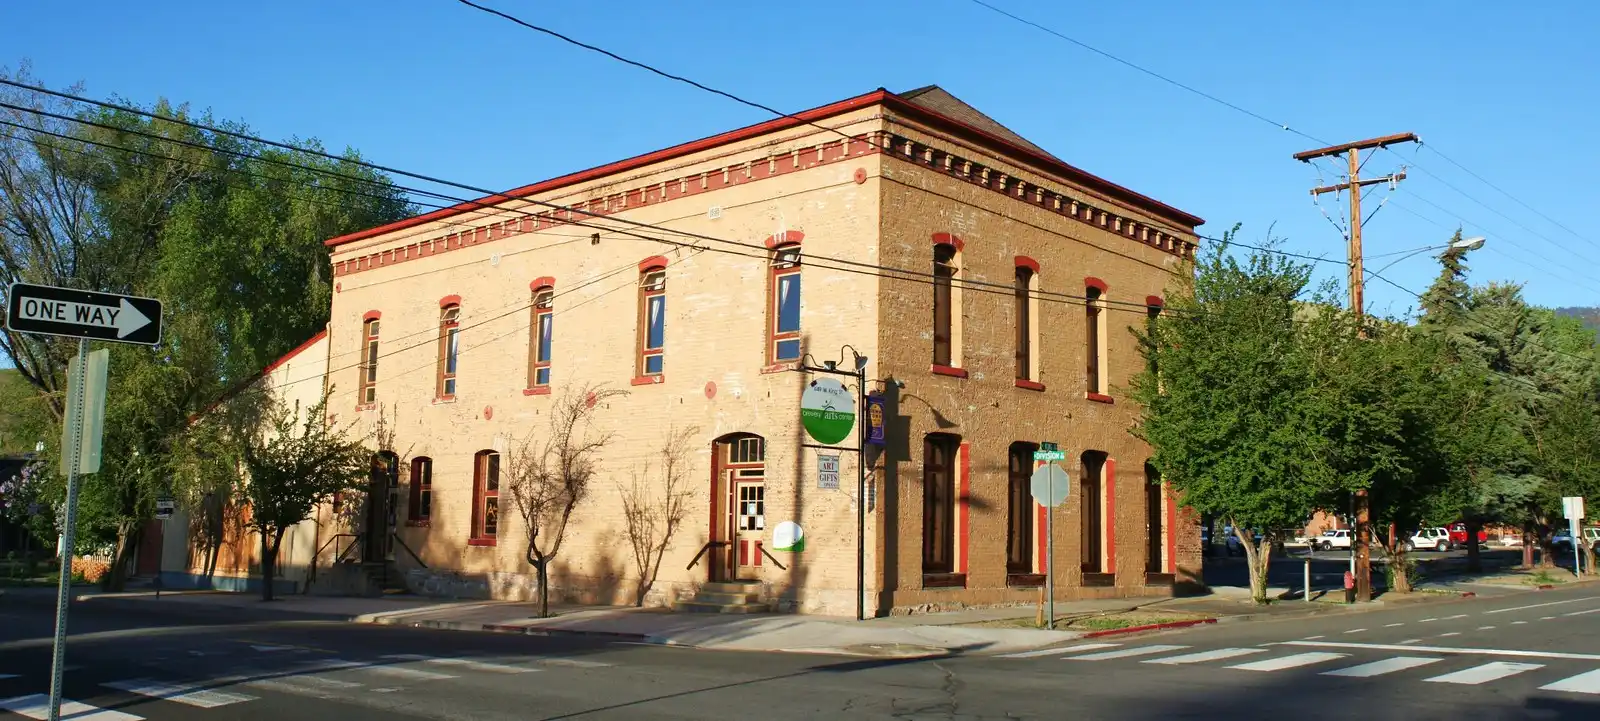 The Brewery Arts Center 